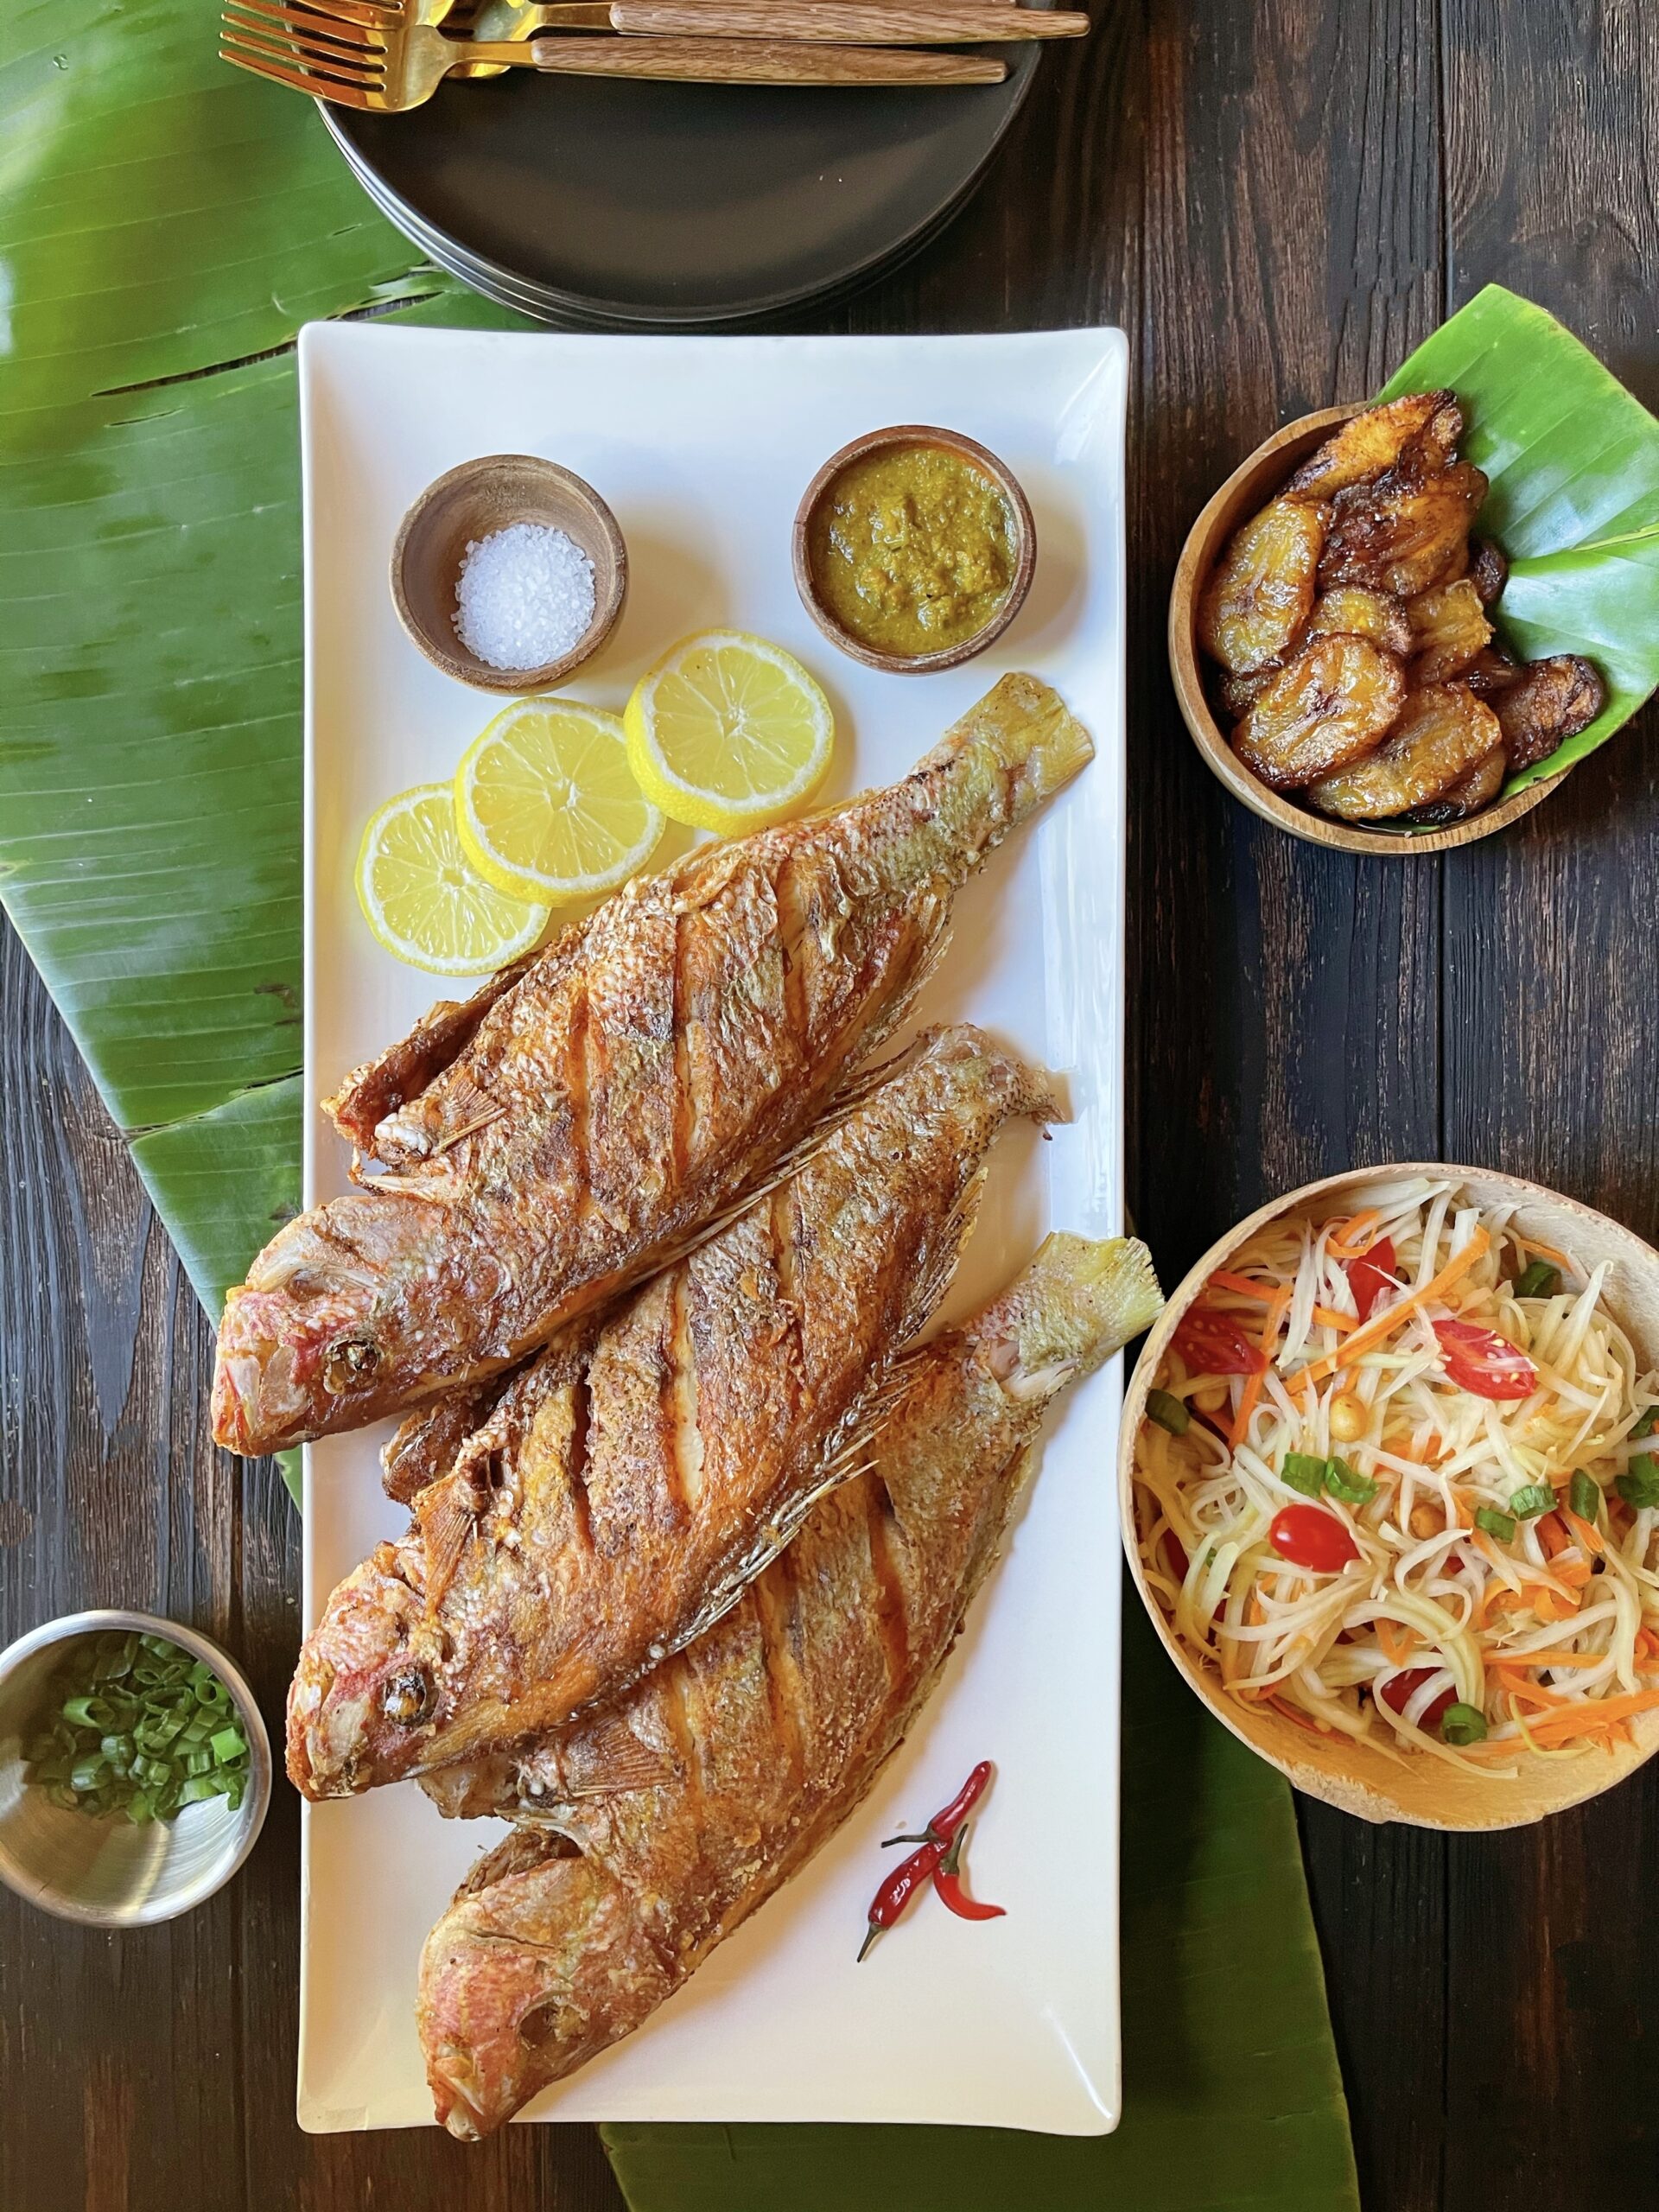 Green papaya salad with fried snapper - Dominica Gourmet